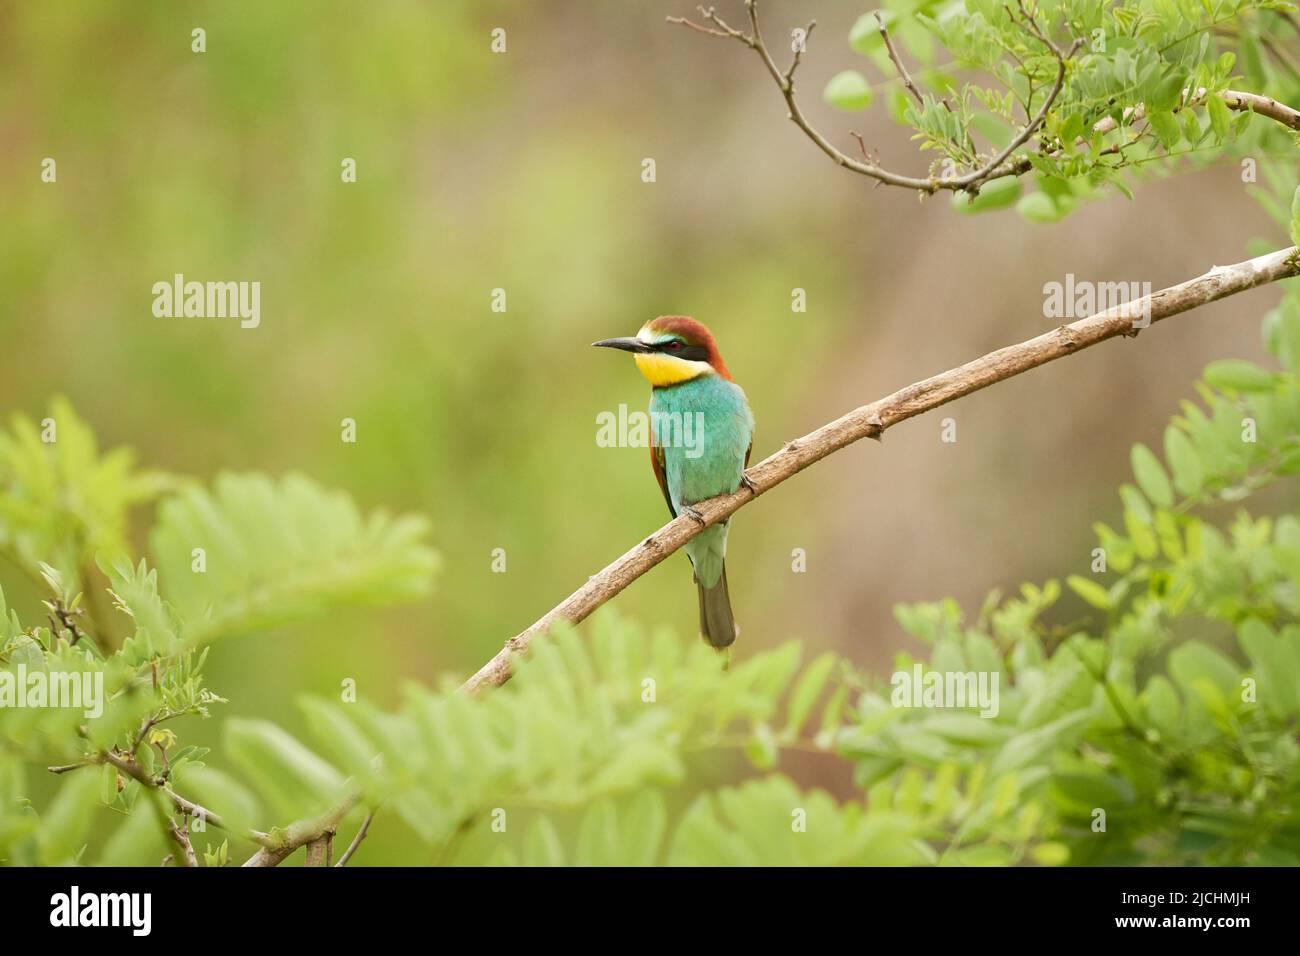 European bee-eater (Merops apiaster) perched on a tree branch Stock Photo